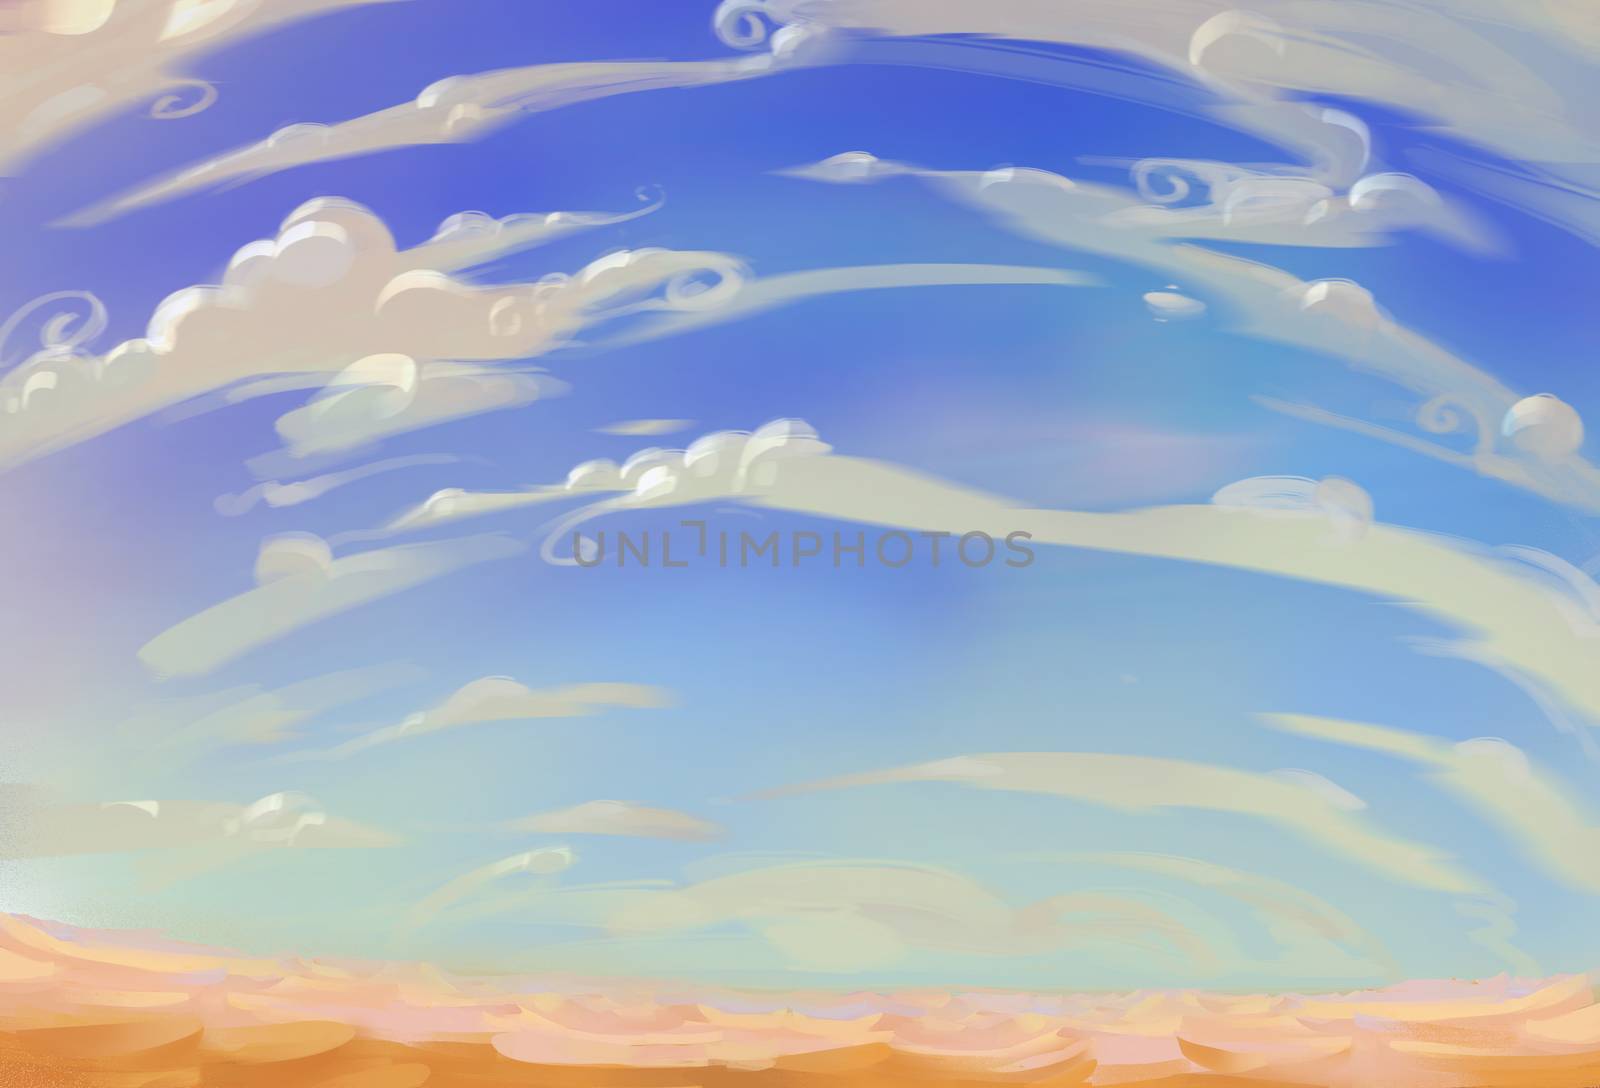 Illustration: The Desert View with different combination: White Cloud, Blue Sky, Shifting Sand, Weird Stone Pillars. Fantastic Realistic Cartoon Style. Wallpaper Background Scene Design.